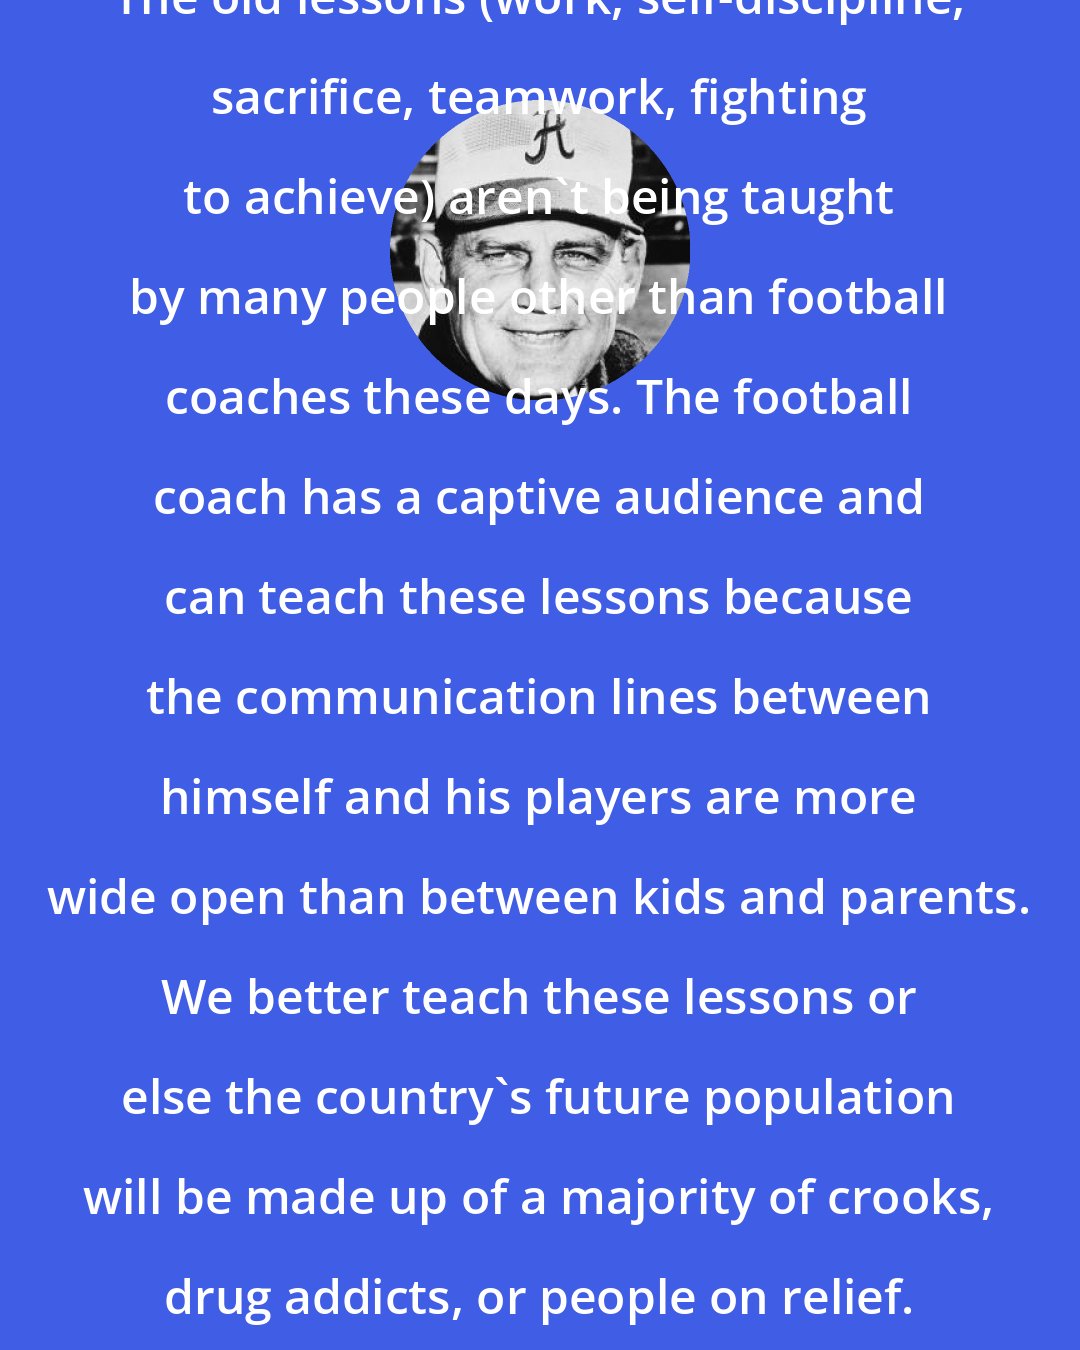 Bear Bryant: The old lessons (work, self-discipline, sacrifice, teamwork, fighting to achieve) aren't being taught by many people other than football coaches these days. The football coach has a captive audience and can teach these lessons because the communication lines between himself and his players are more wide open than between kids and parents. We better teach these lessons or else the country's future population will be made up of a majority of crooks, drug addicts, or people on relief.